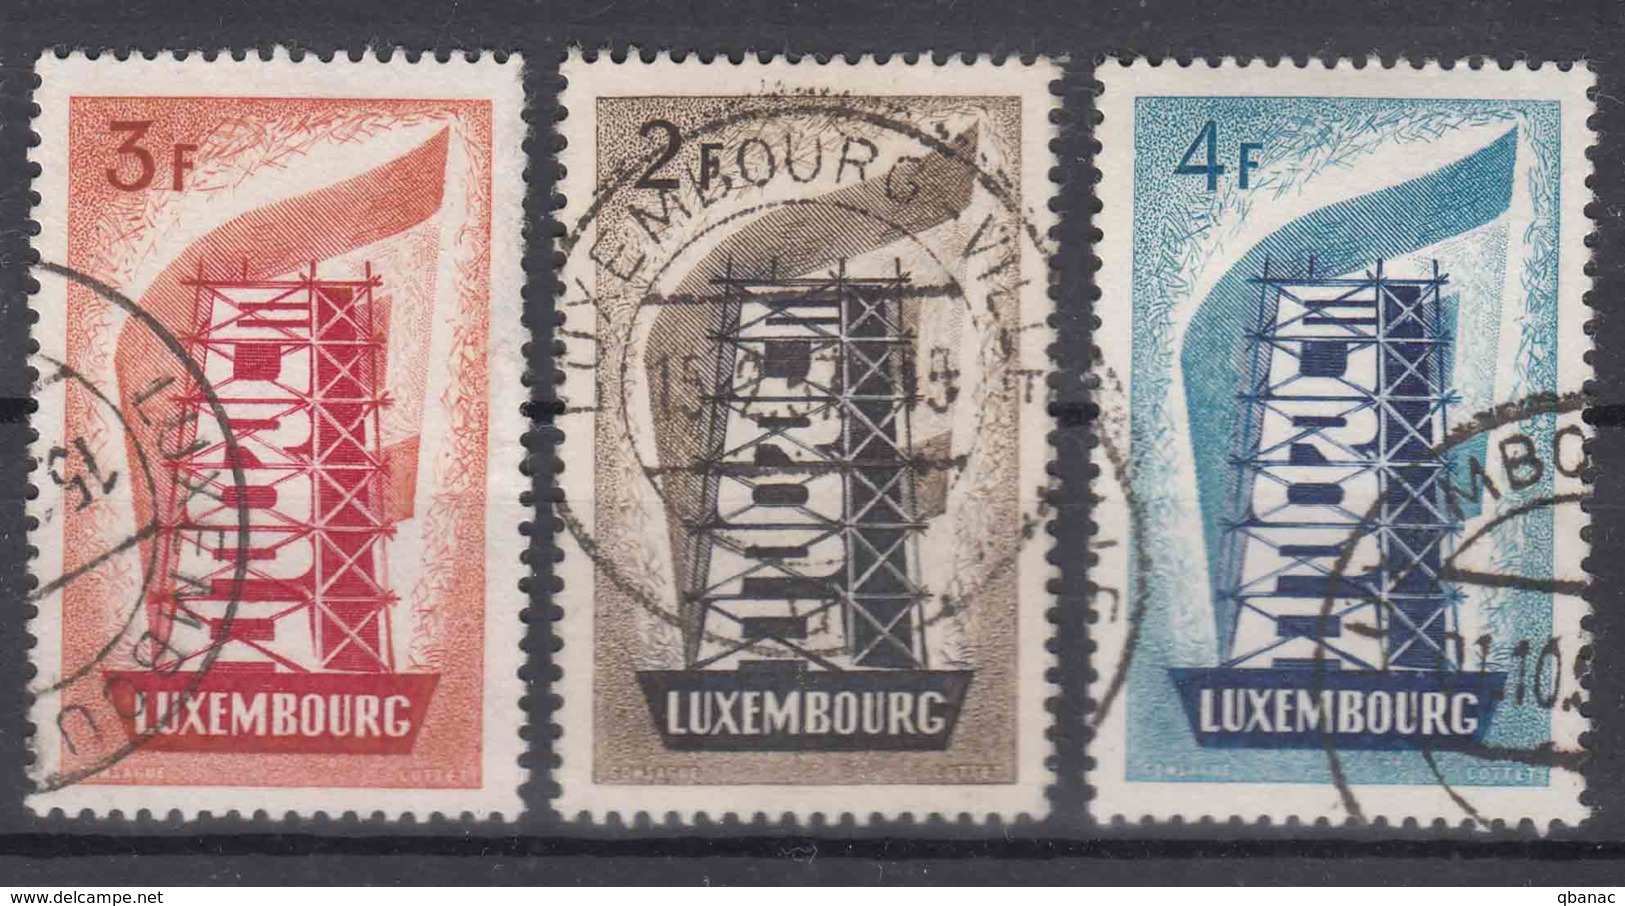 Luxembourg 1956 Europa CEPT Mi#555-557 Used - Used Stamps